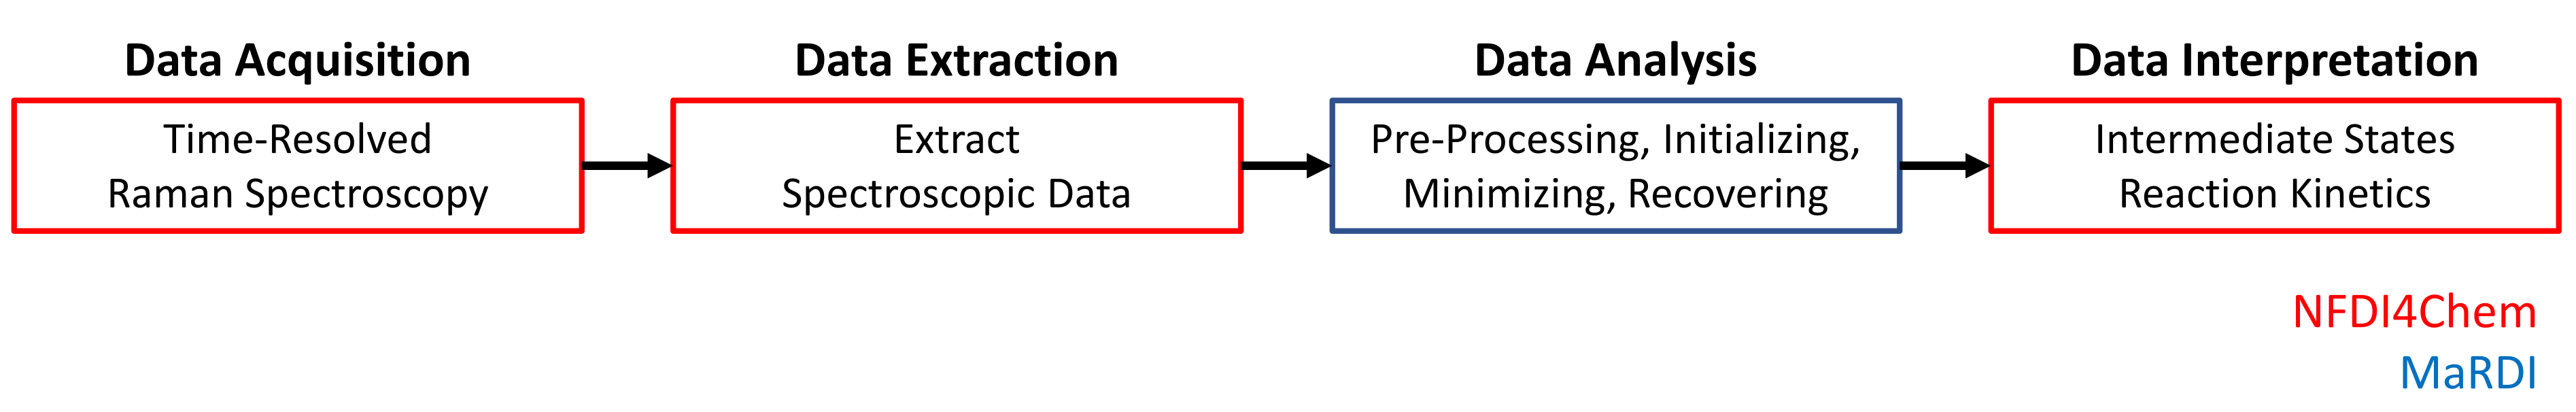 File:Workflow Figure.png